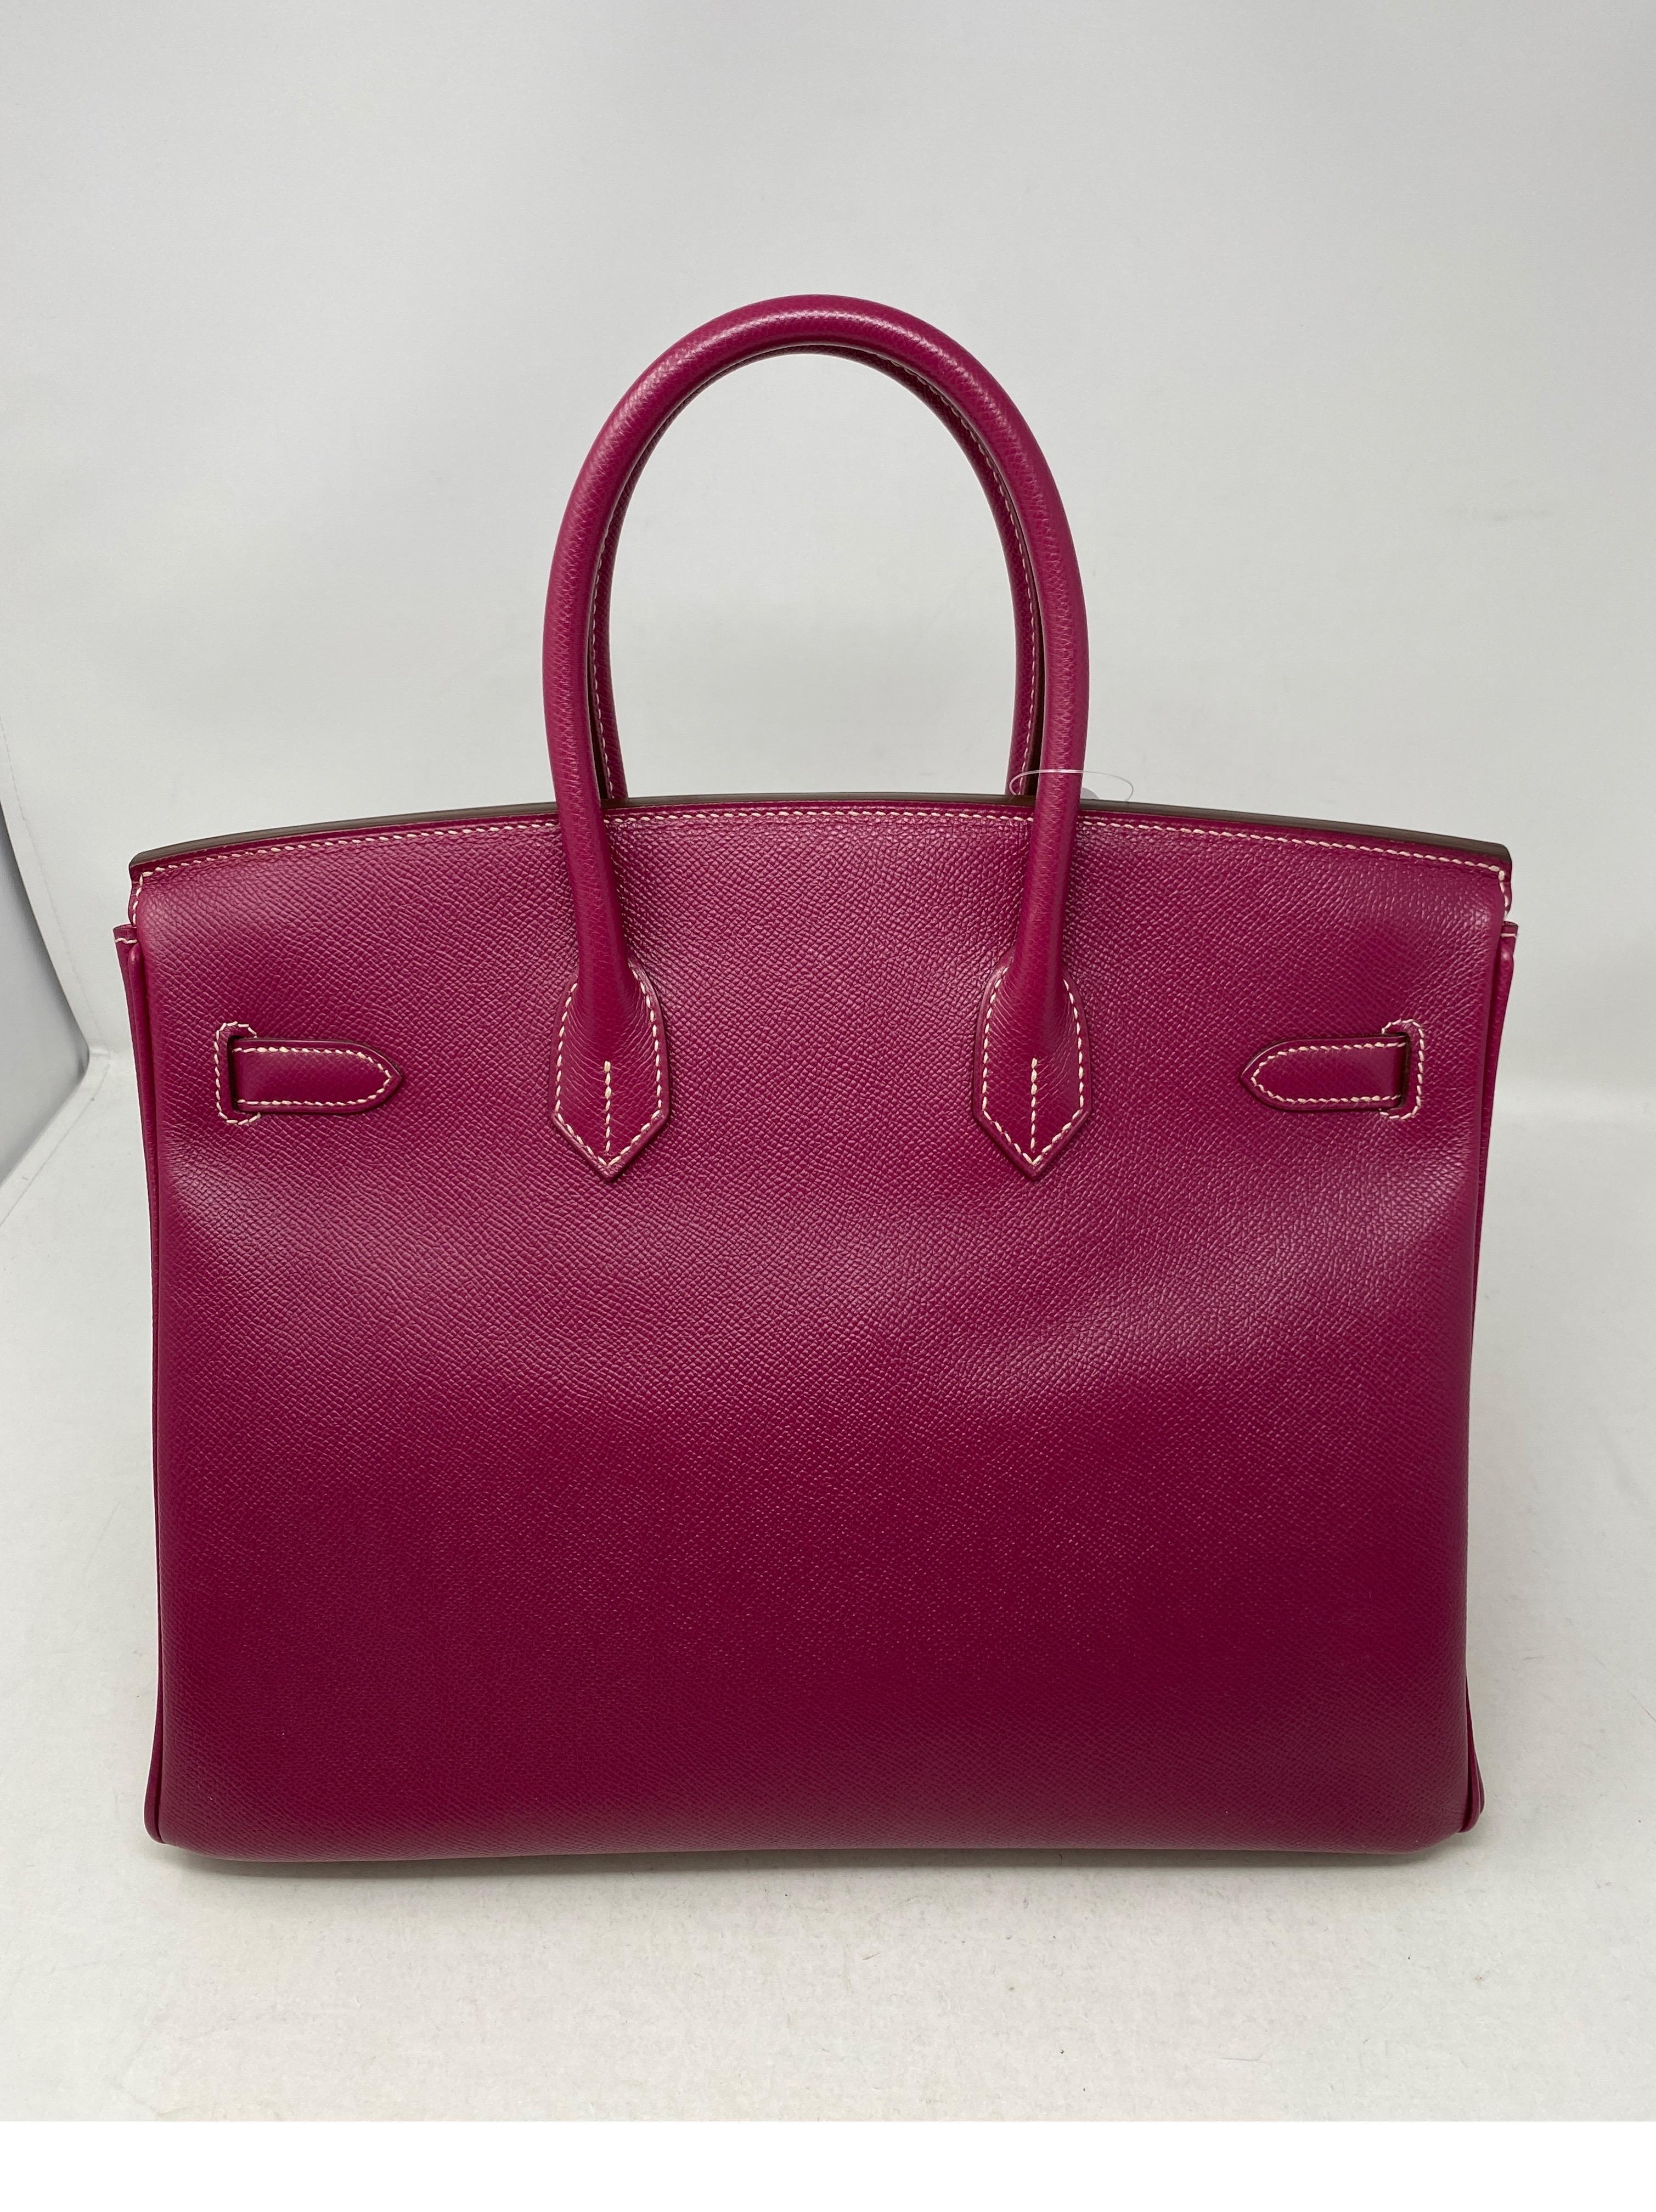 Hermes Birkin 35 Tosca/ Rose Tyrien Candy Collection Bag 3